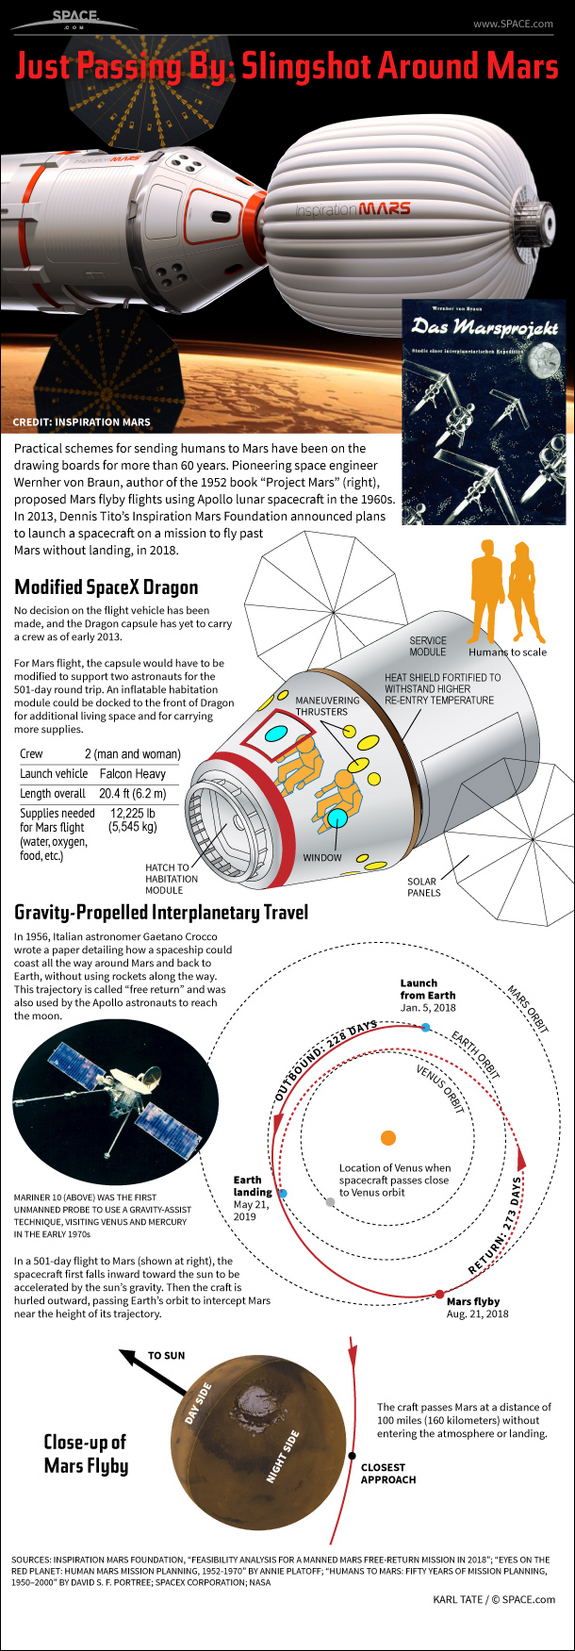 Find out about Dennis Tito's daring proposal to send a married couple on a 501-day space flight around the planet Mars and back, in this SPACE.com Infographic.